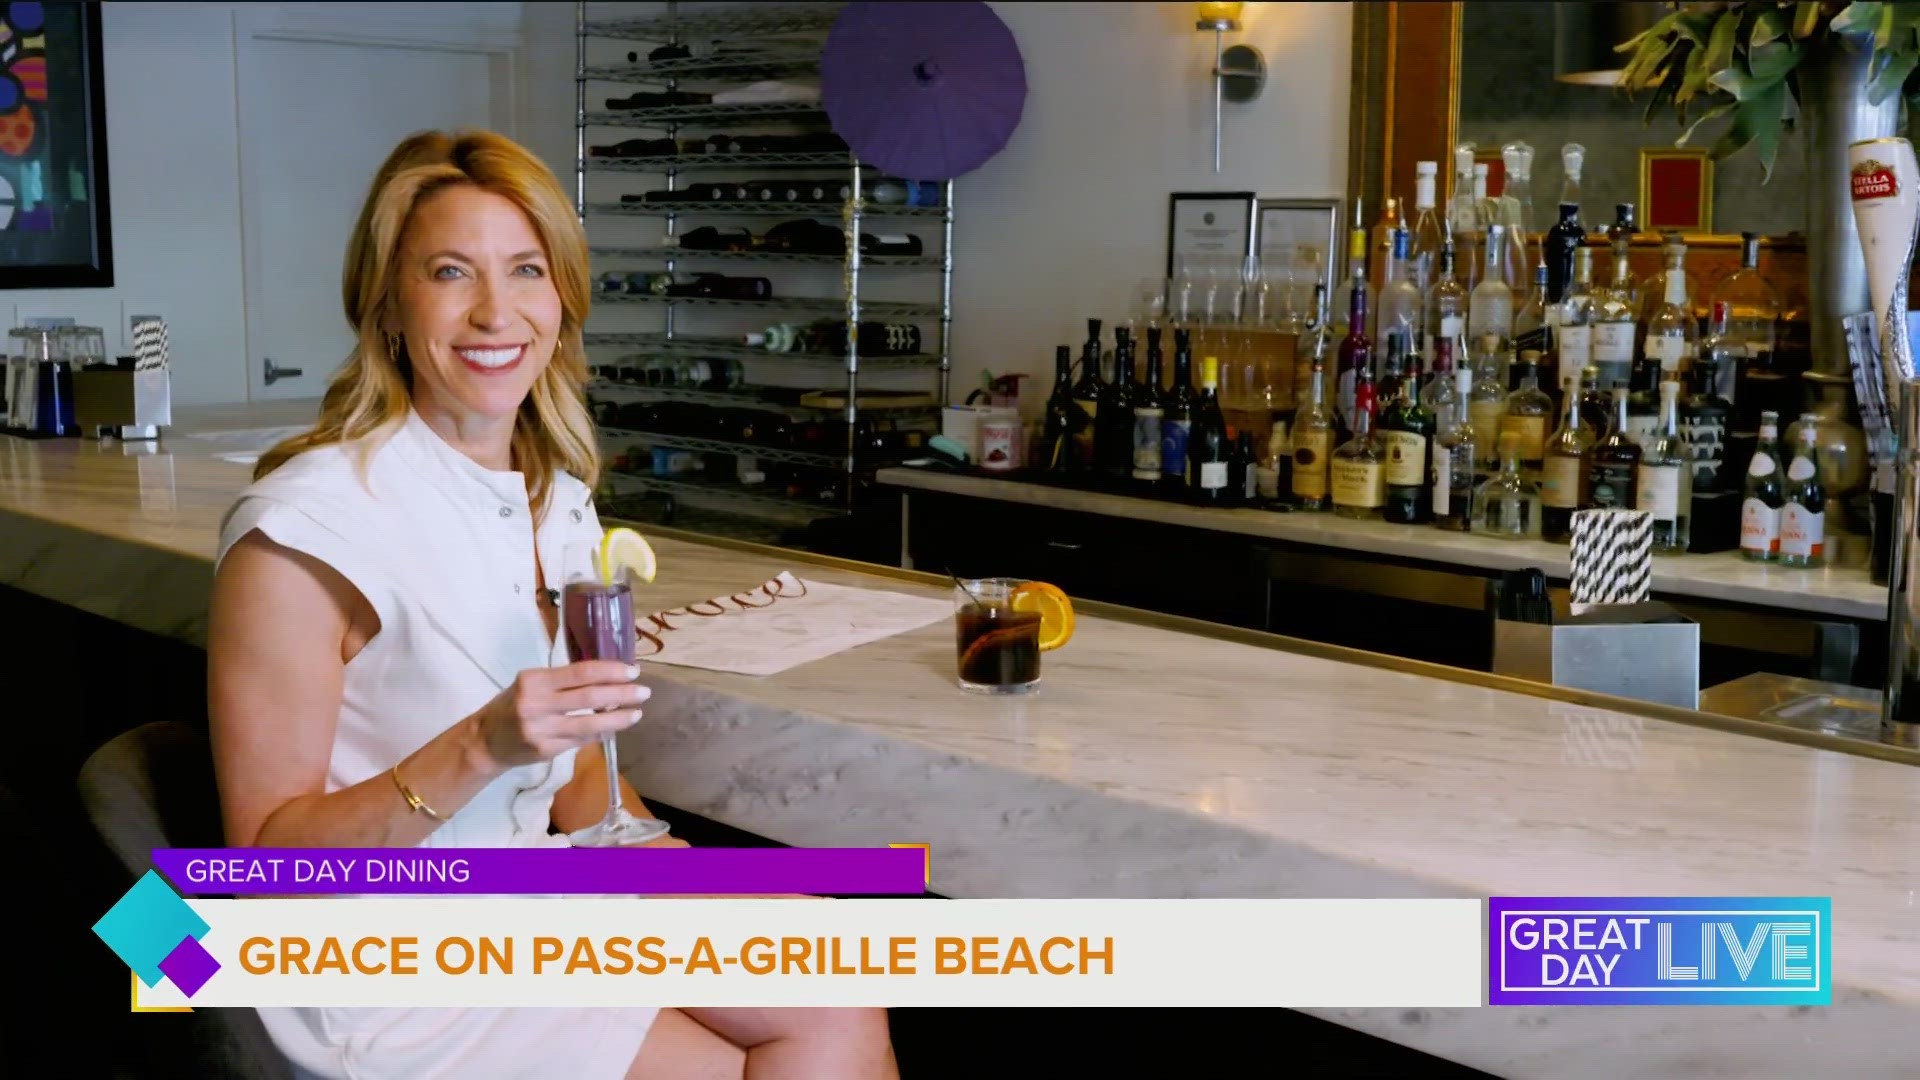 We head to Pass-a-Grille Beach in St Pete for today’s Great Day Dining and get a taste of the newly revamped Grace restaurant.